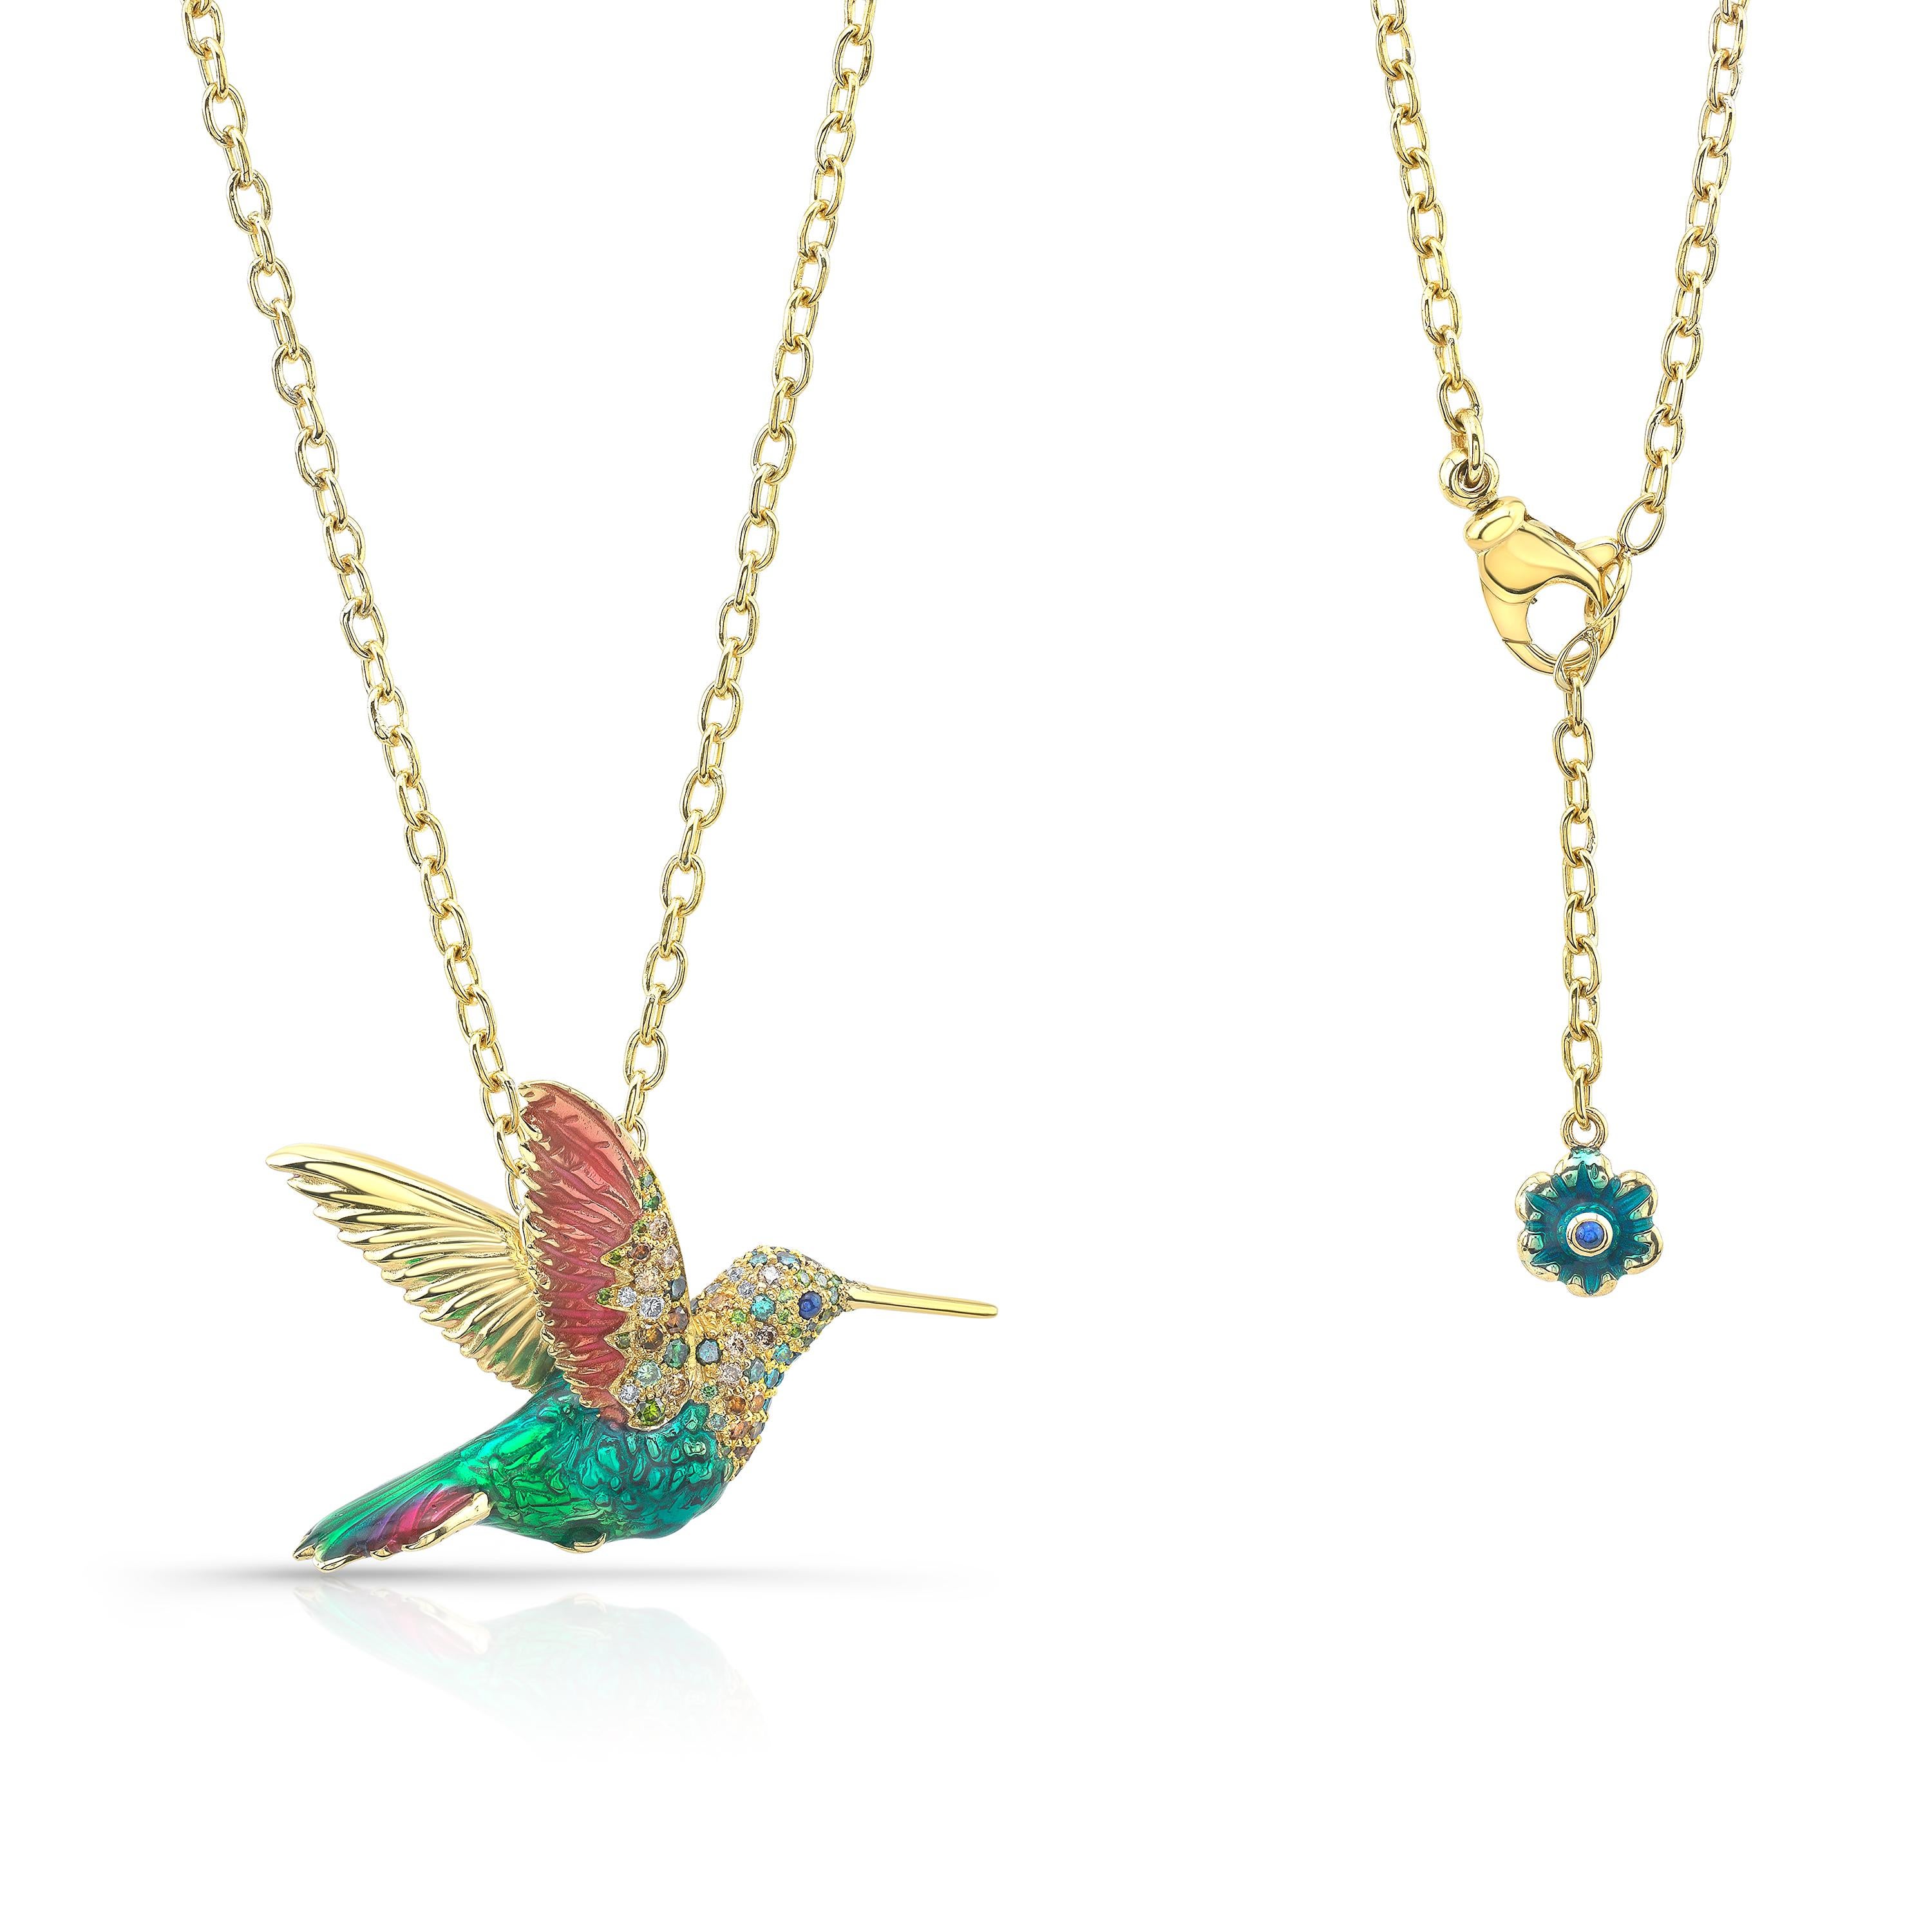 Amy Y's 18K-yellow gold, rose gold, diamond, precious colored gem and painted enamel Hummingbirds are precious pieces to represent her love of the animal kingdom.  Her attention to detail is evident in each beautiful and unique version she creates